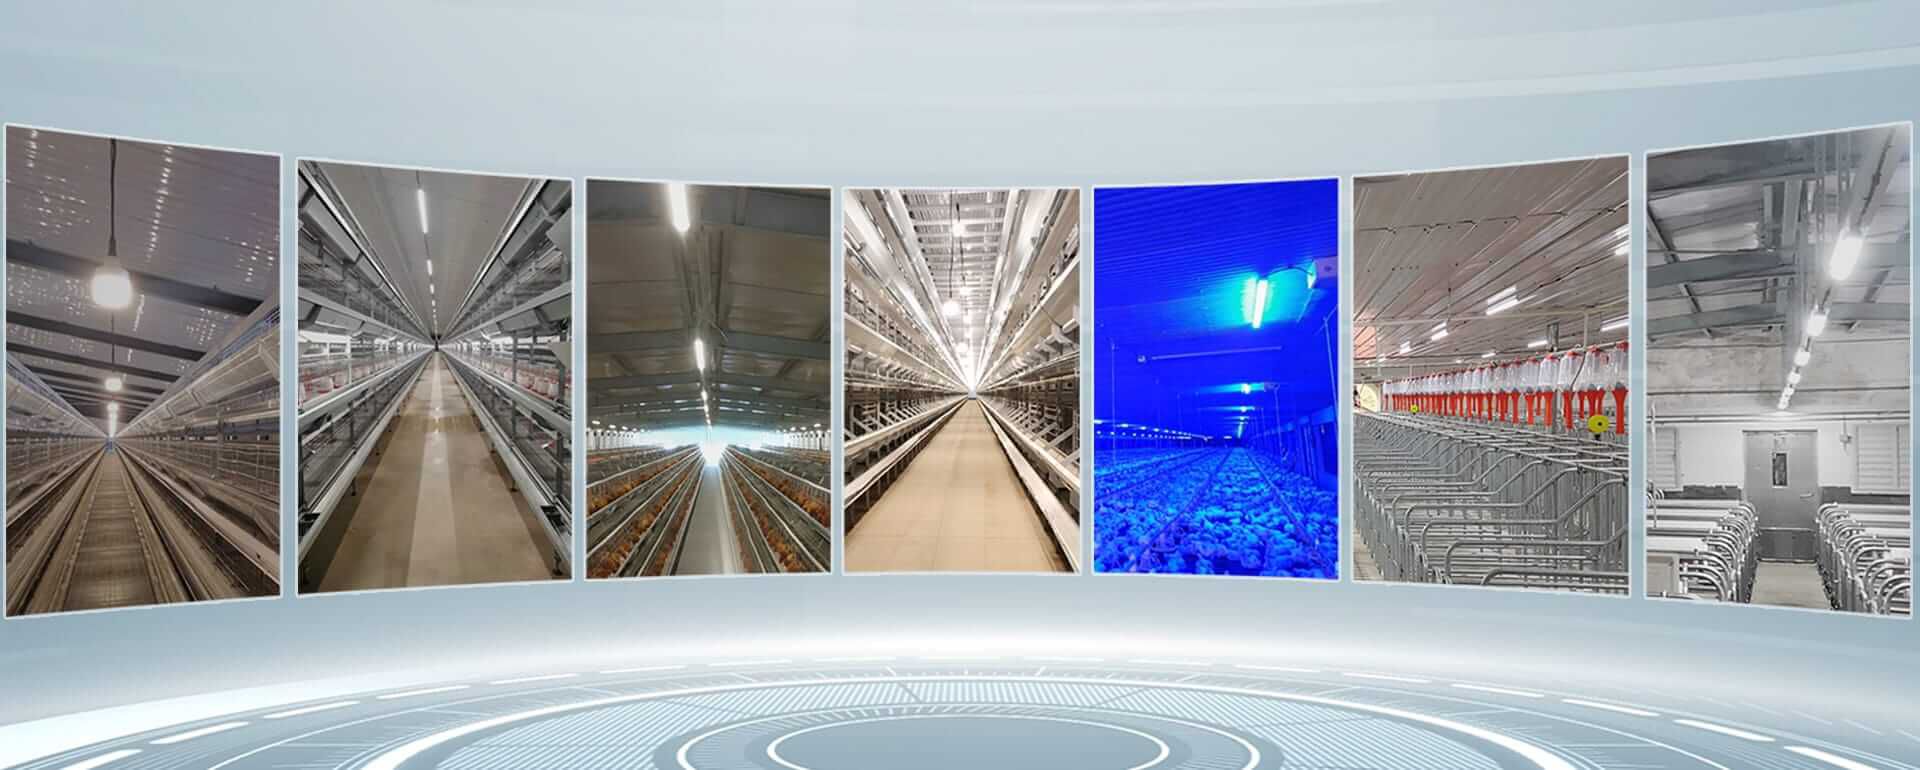 poultry lighting system